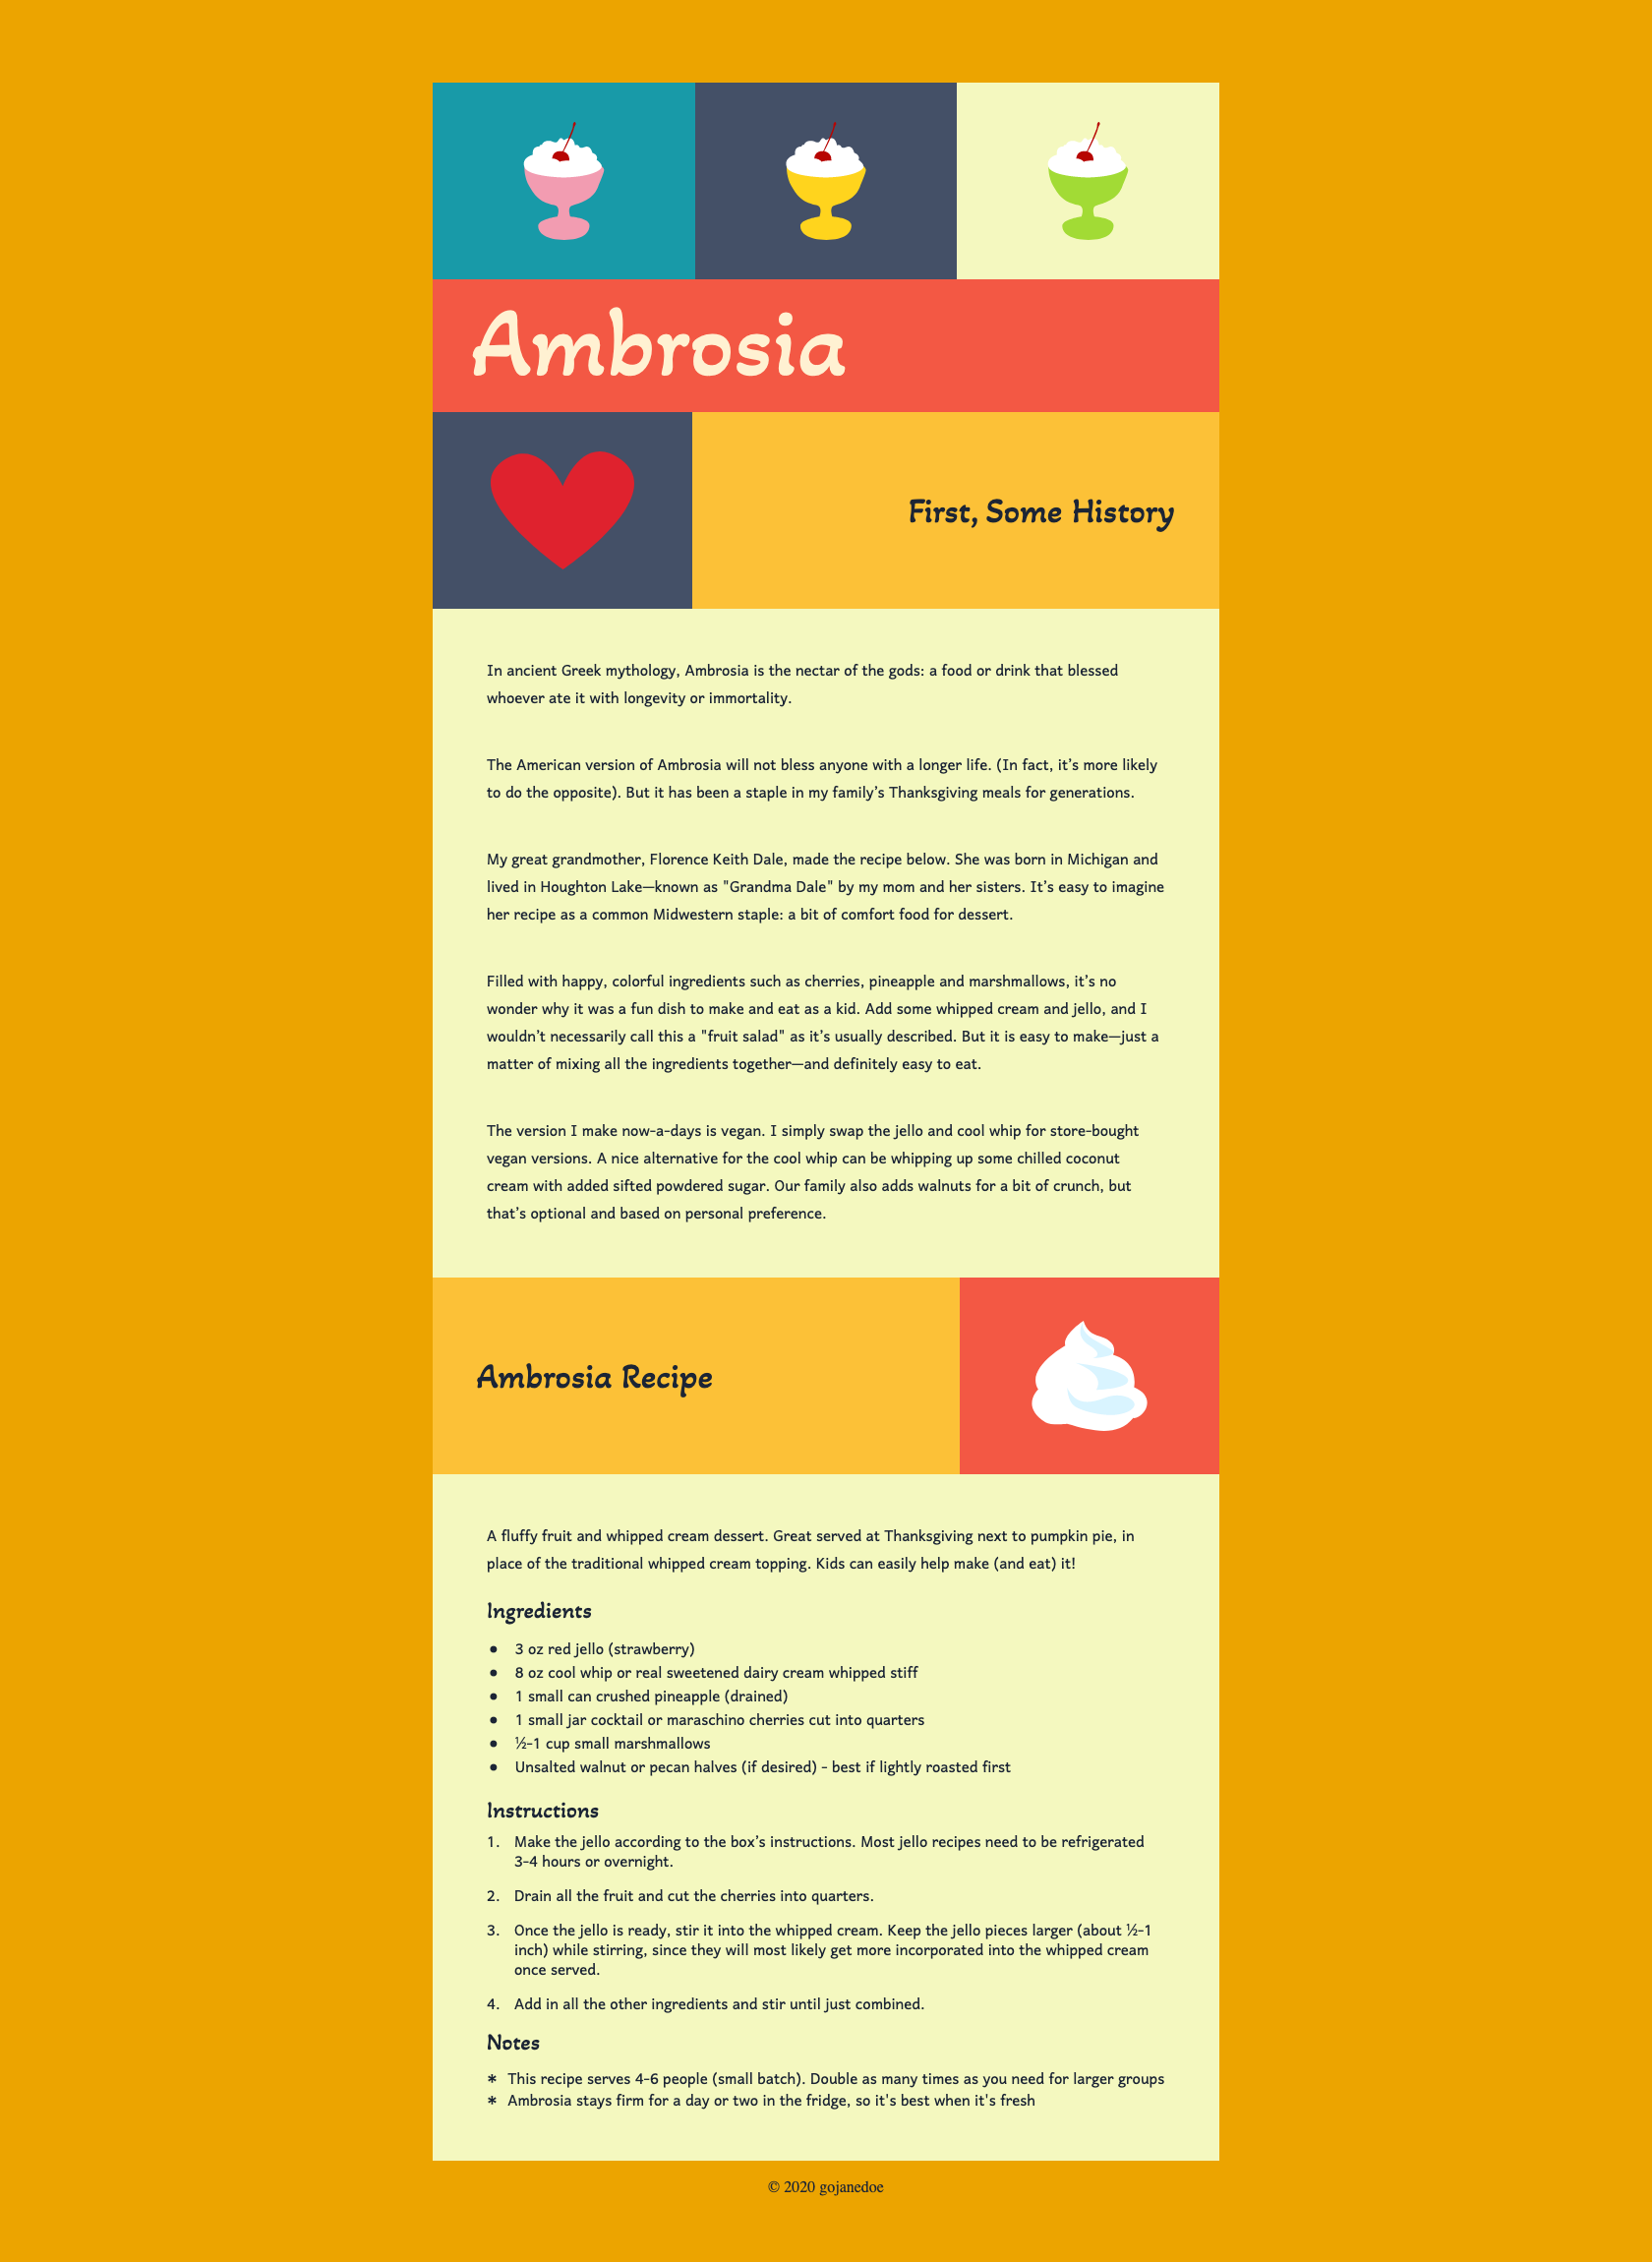 Screenshot of the ambrosia webpage at a desktop screen size. A grid of illustrations of cups of whipped cream and cherries, and a heart are followed by a section of text explaining the history of the recipe. Below that is the ambrosia recipe itself.